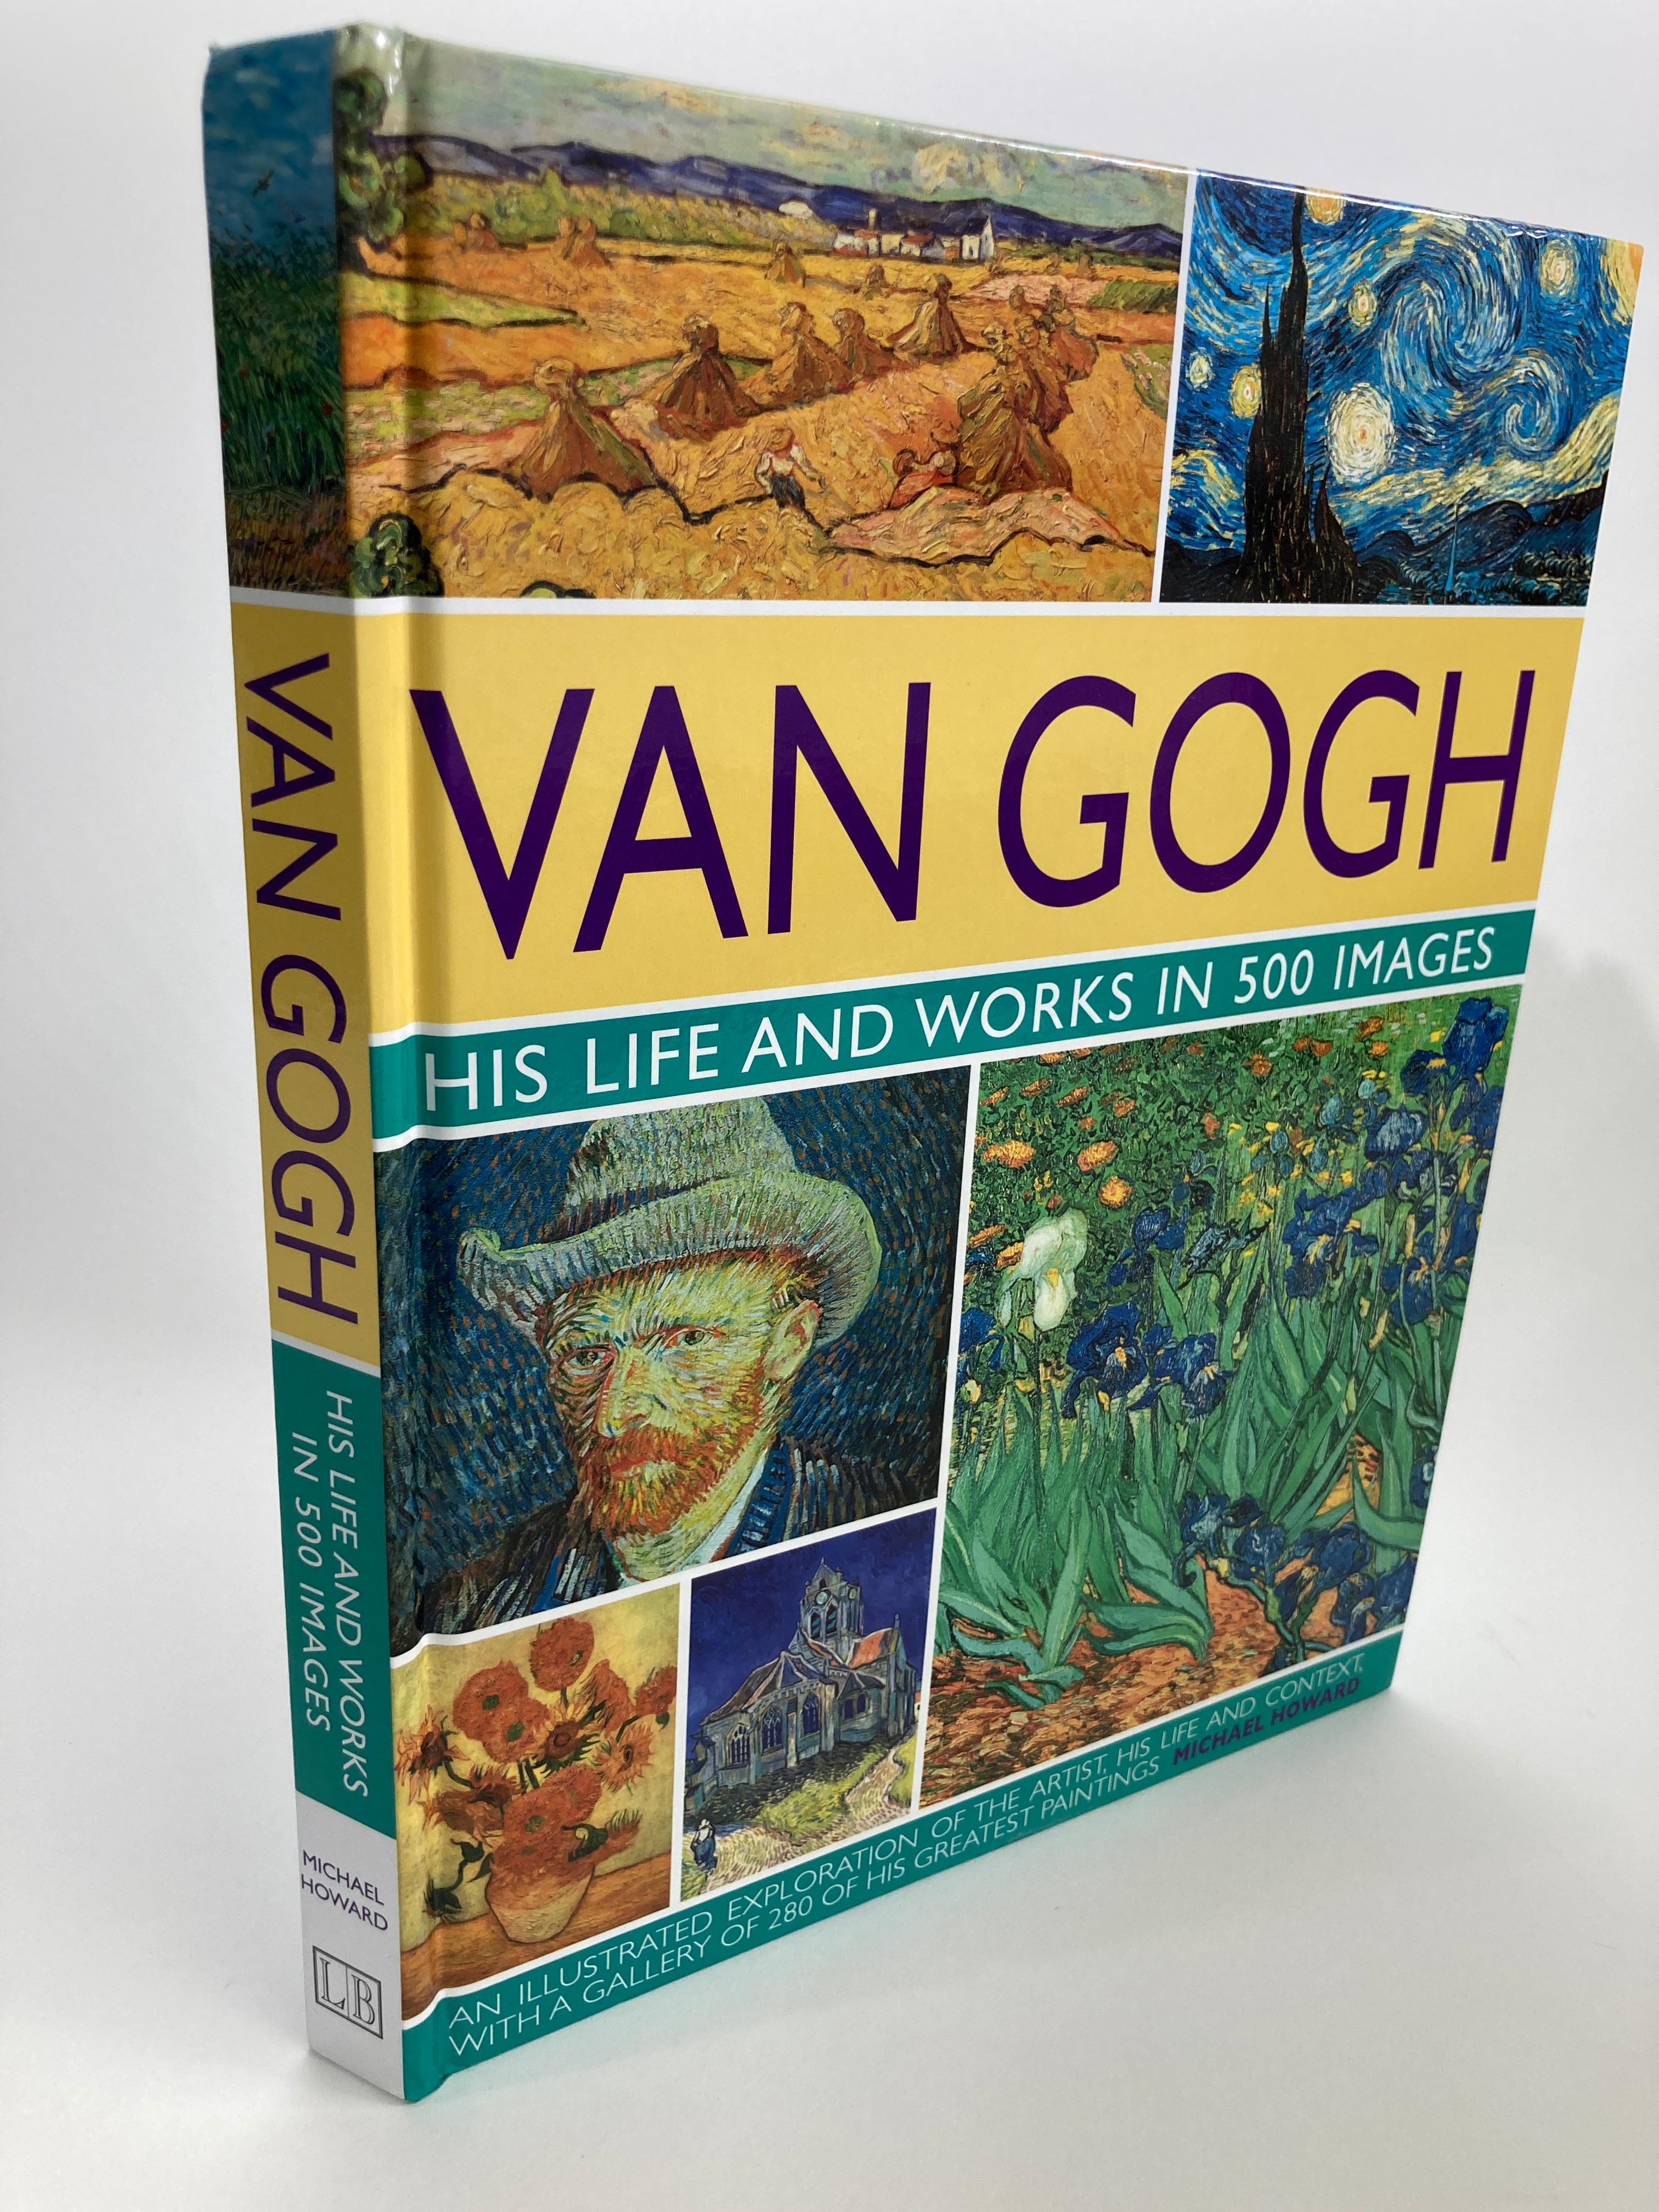 Van Gogh His Life and Works in 500 Images Hardcover Book